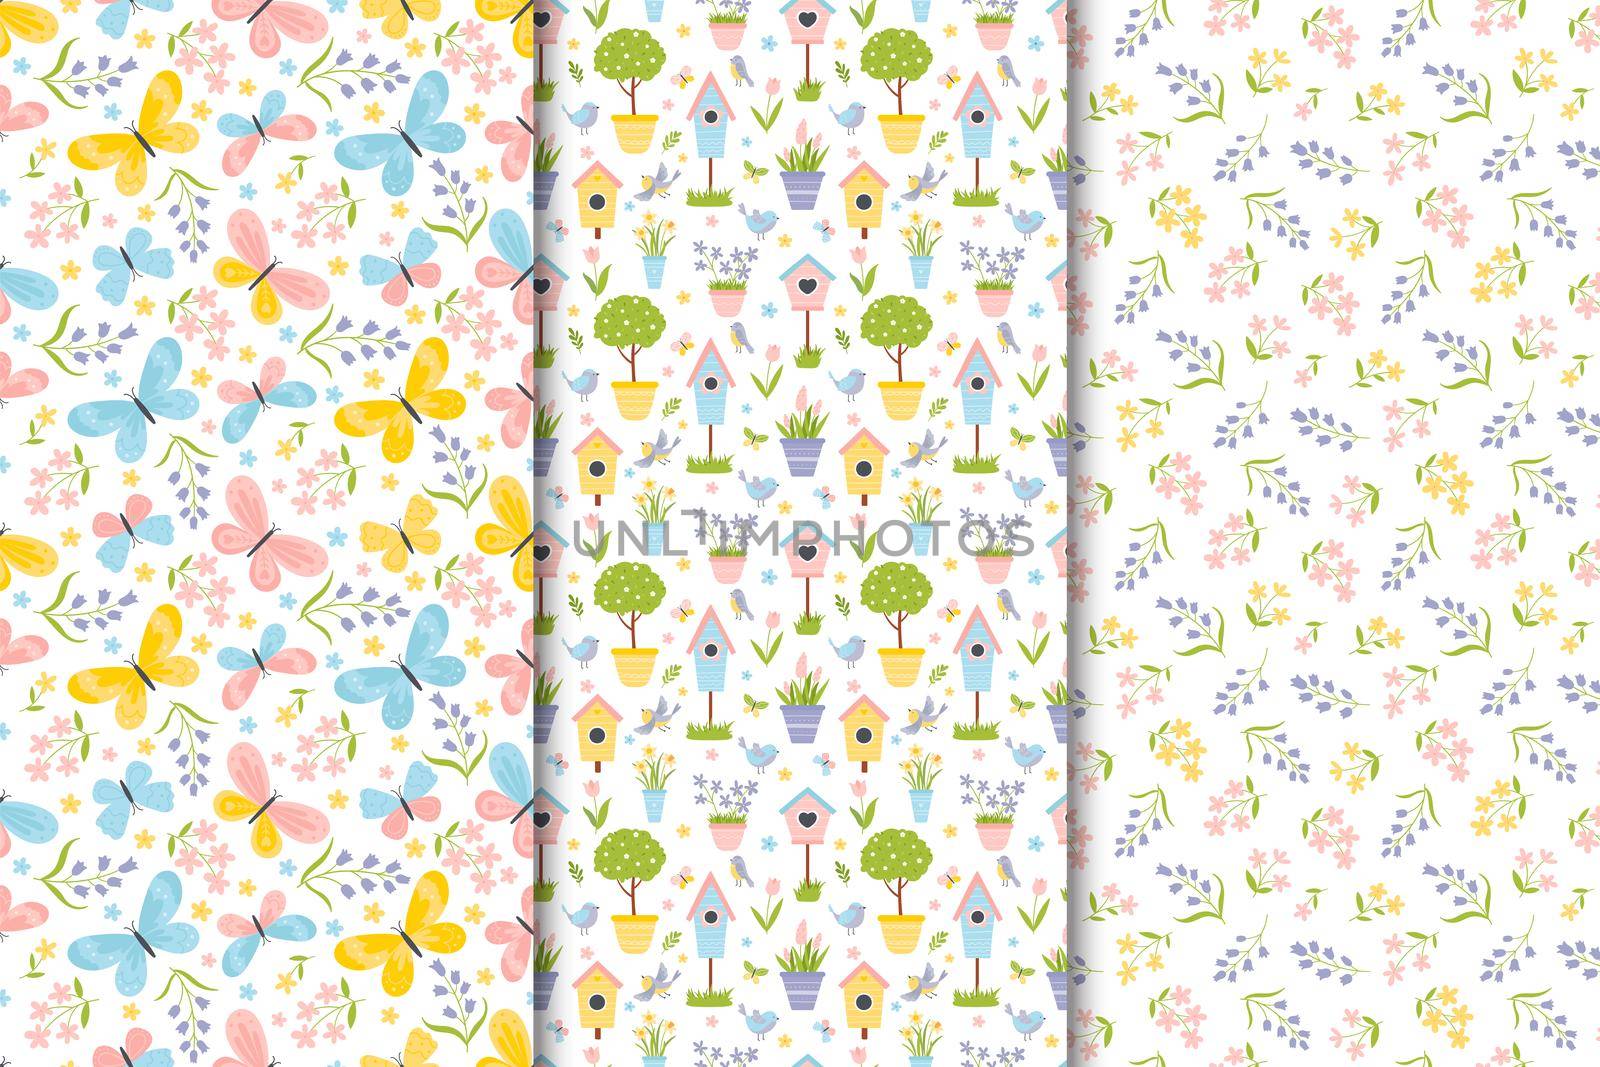 Spring set of seamless patterns in flat hand drawn cartoon style. Vector children's colorful illustration of a bird, potted plants, flowers, birdhouses, butterflies. by Lena_Khmelniuk